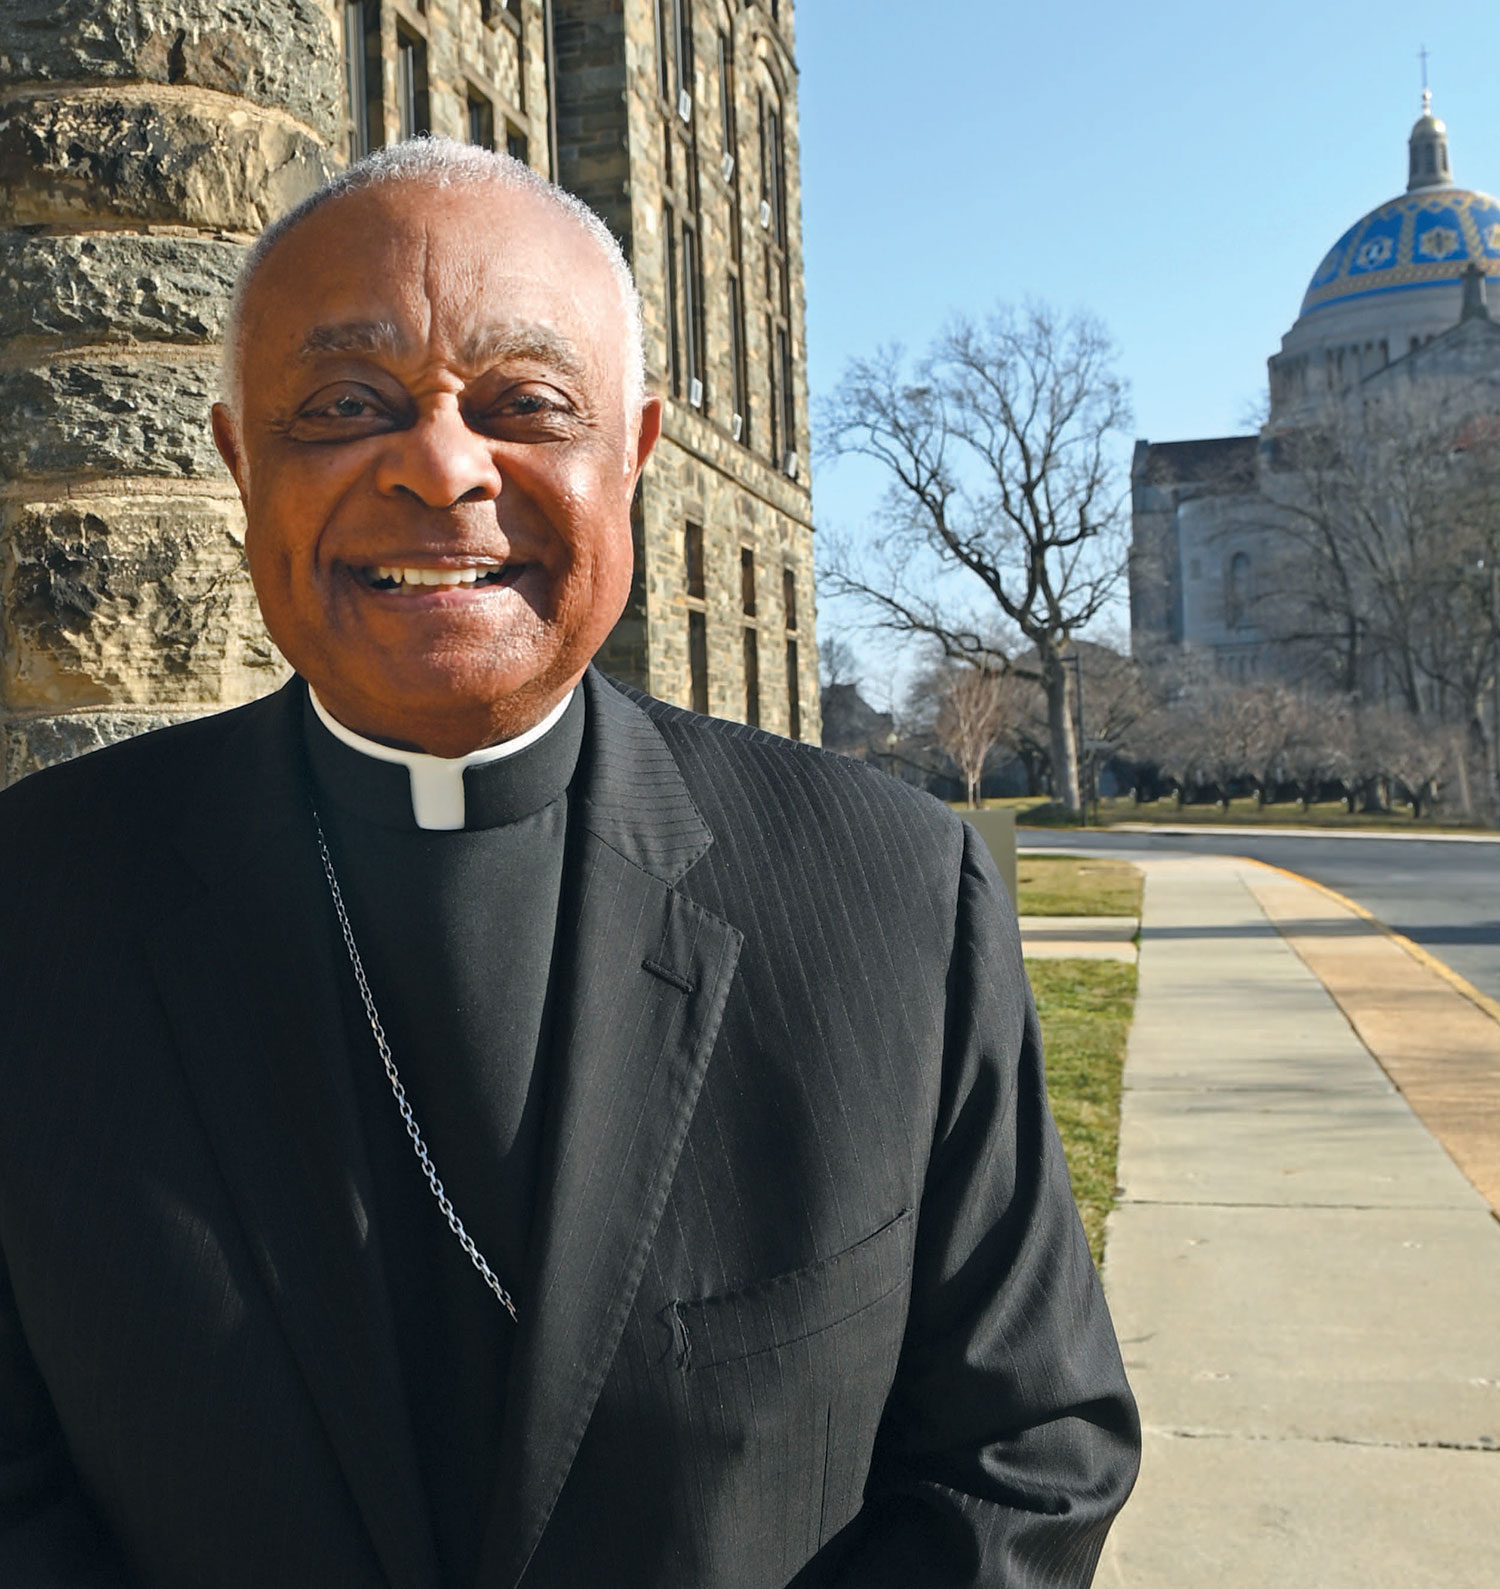 Archbishop Wilton Gregory in front of Caldwell Hall with the Basilica of the National Shrine of the Immaculate Conception in the background